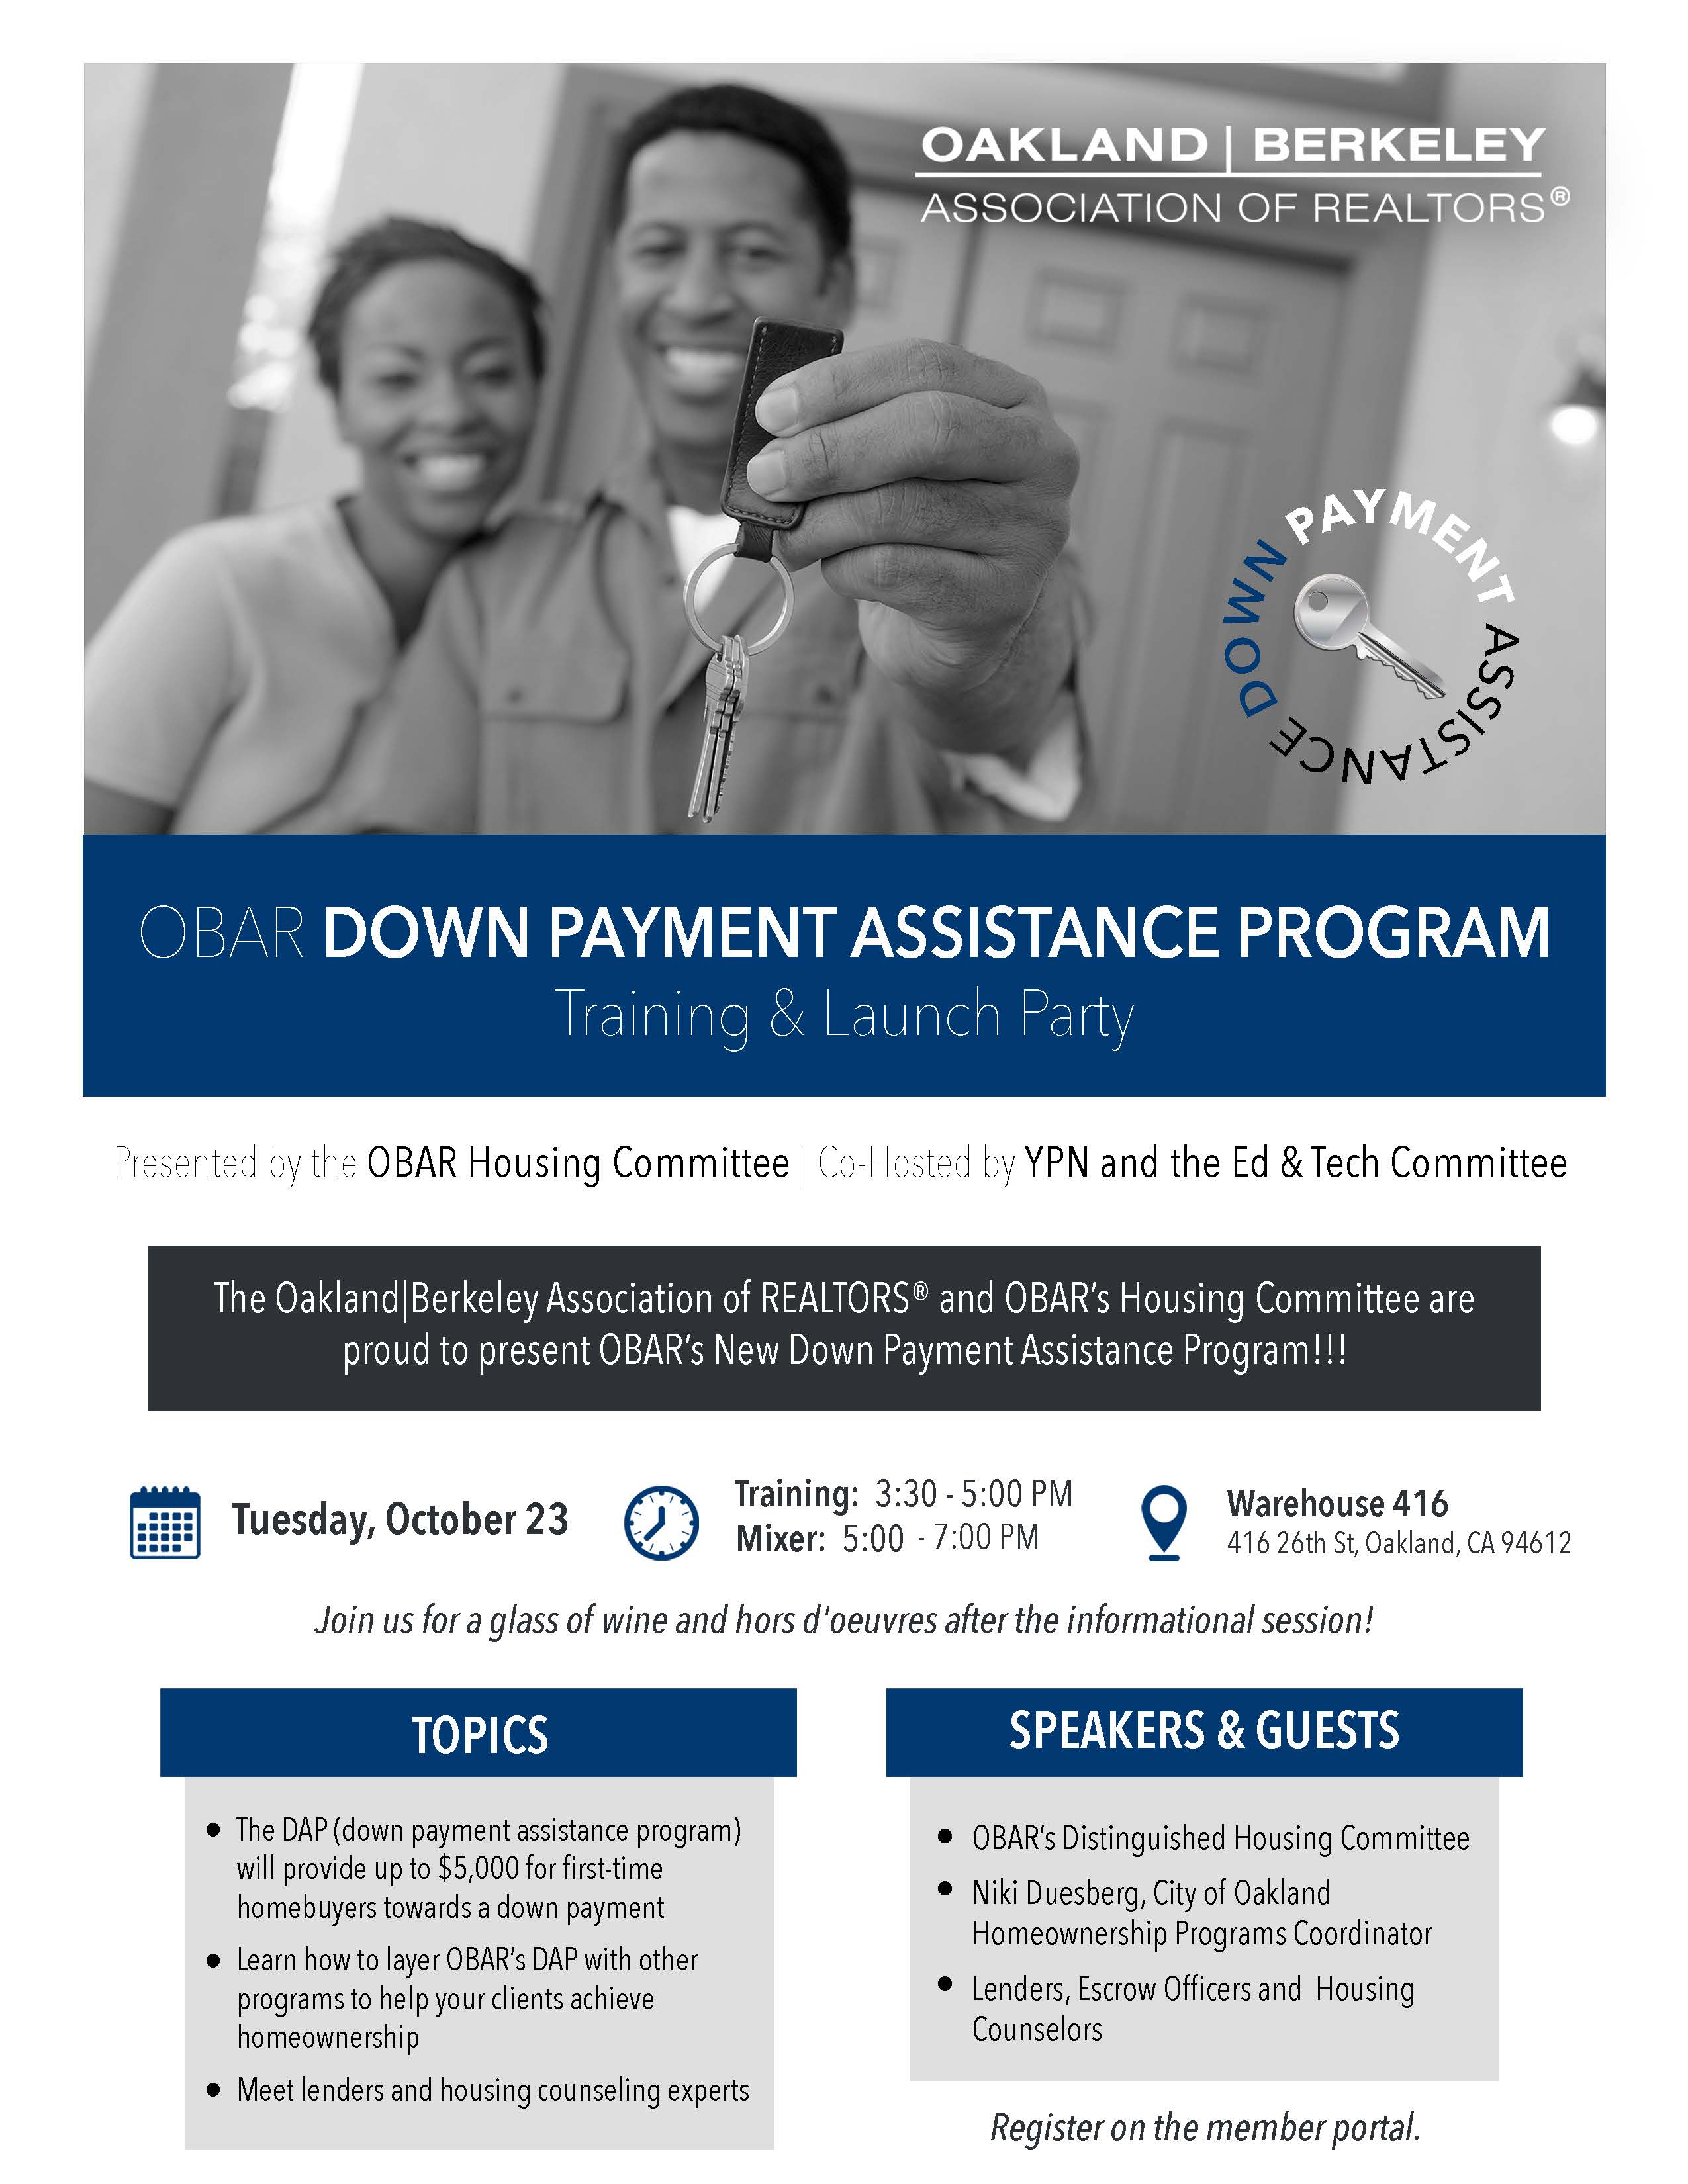 Down Payment Assistance Class by Team Puente in La Mesa, CA - Alignable